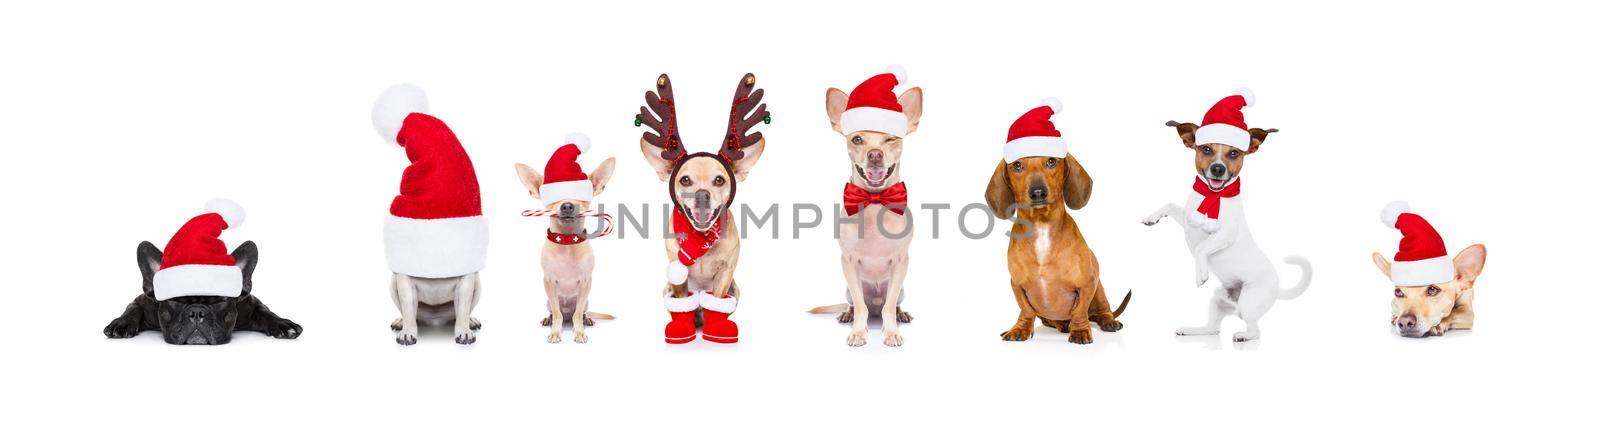 big team row of dogs on christmas holidays by Brosch